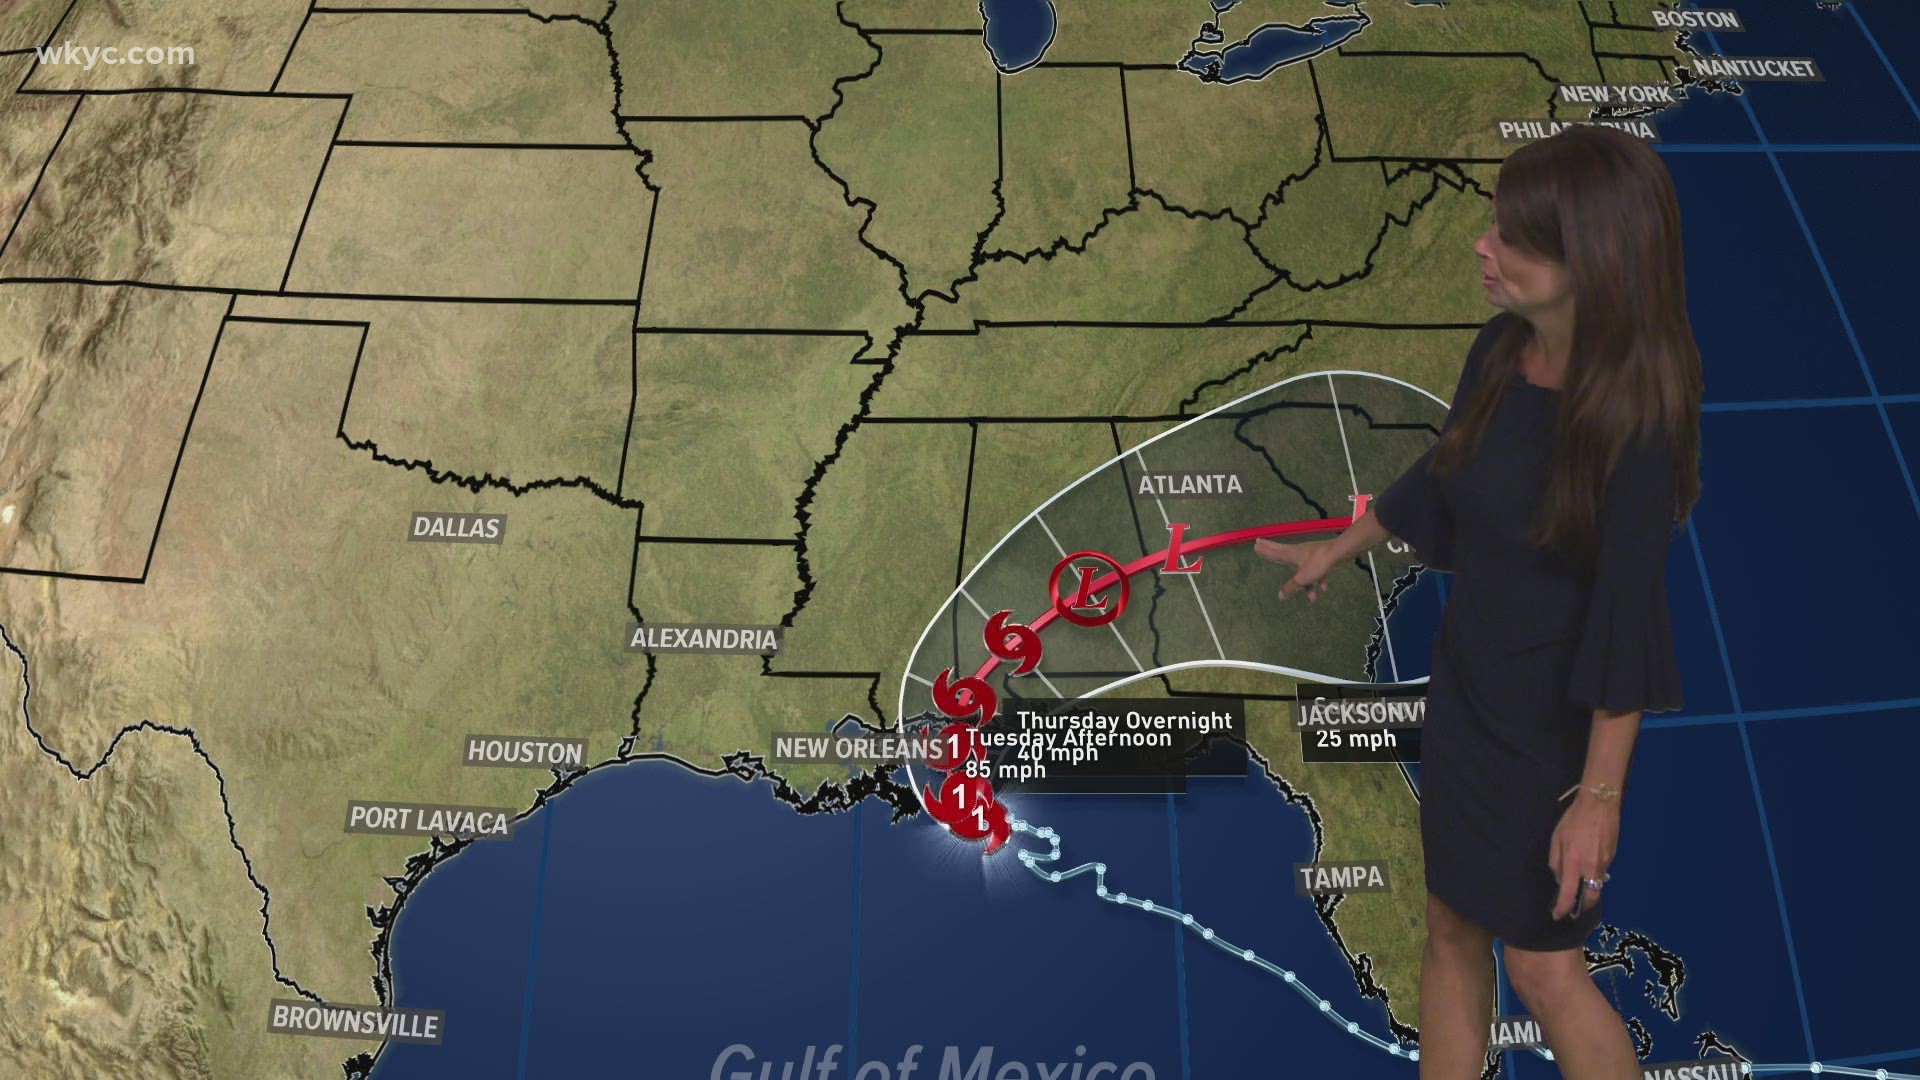 Sept. 15, 2020: As Hurricane Sally approaches the U.S. coast, Hollie Strano shares the storm's latest path. The slow-moving storm could become a Category 2.